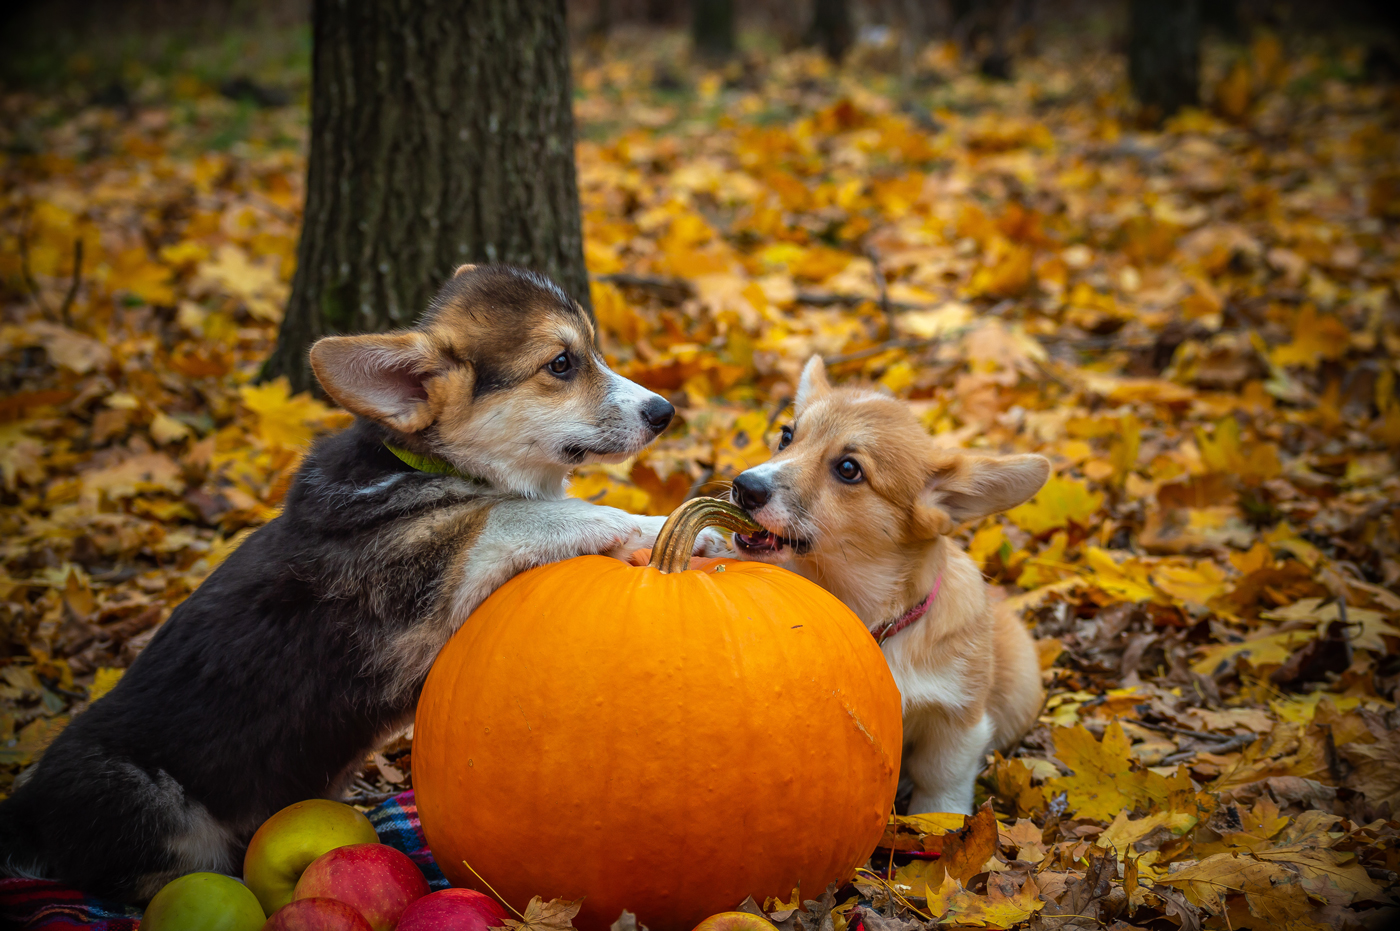 Two small dogs lying next to a pumpkin in a wooded area in autumn